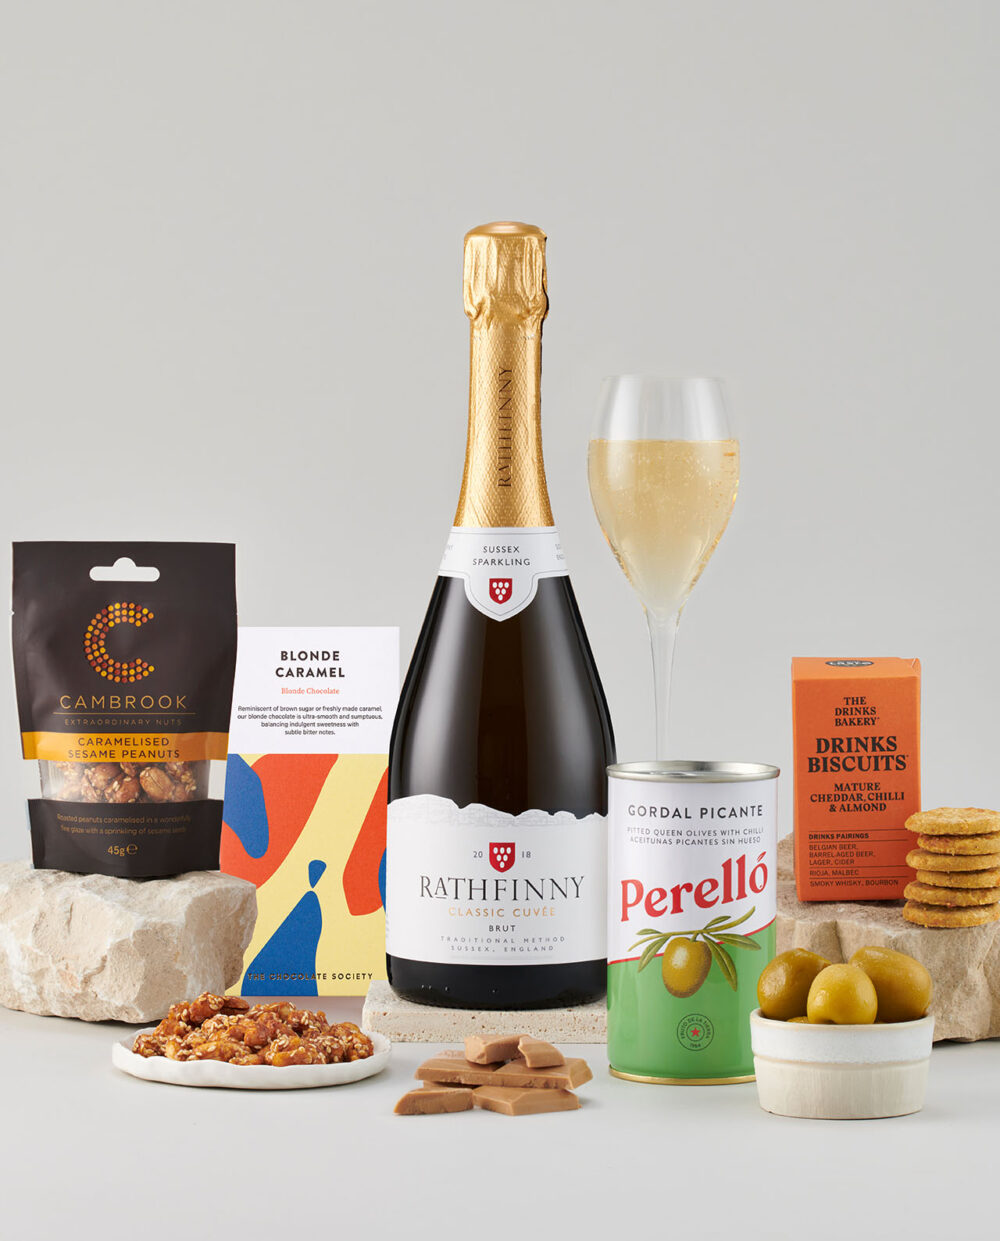 Bottle of Classic Cuvee 2018 Surrounded by a Selection of Smartly Packaged Foods.